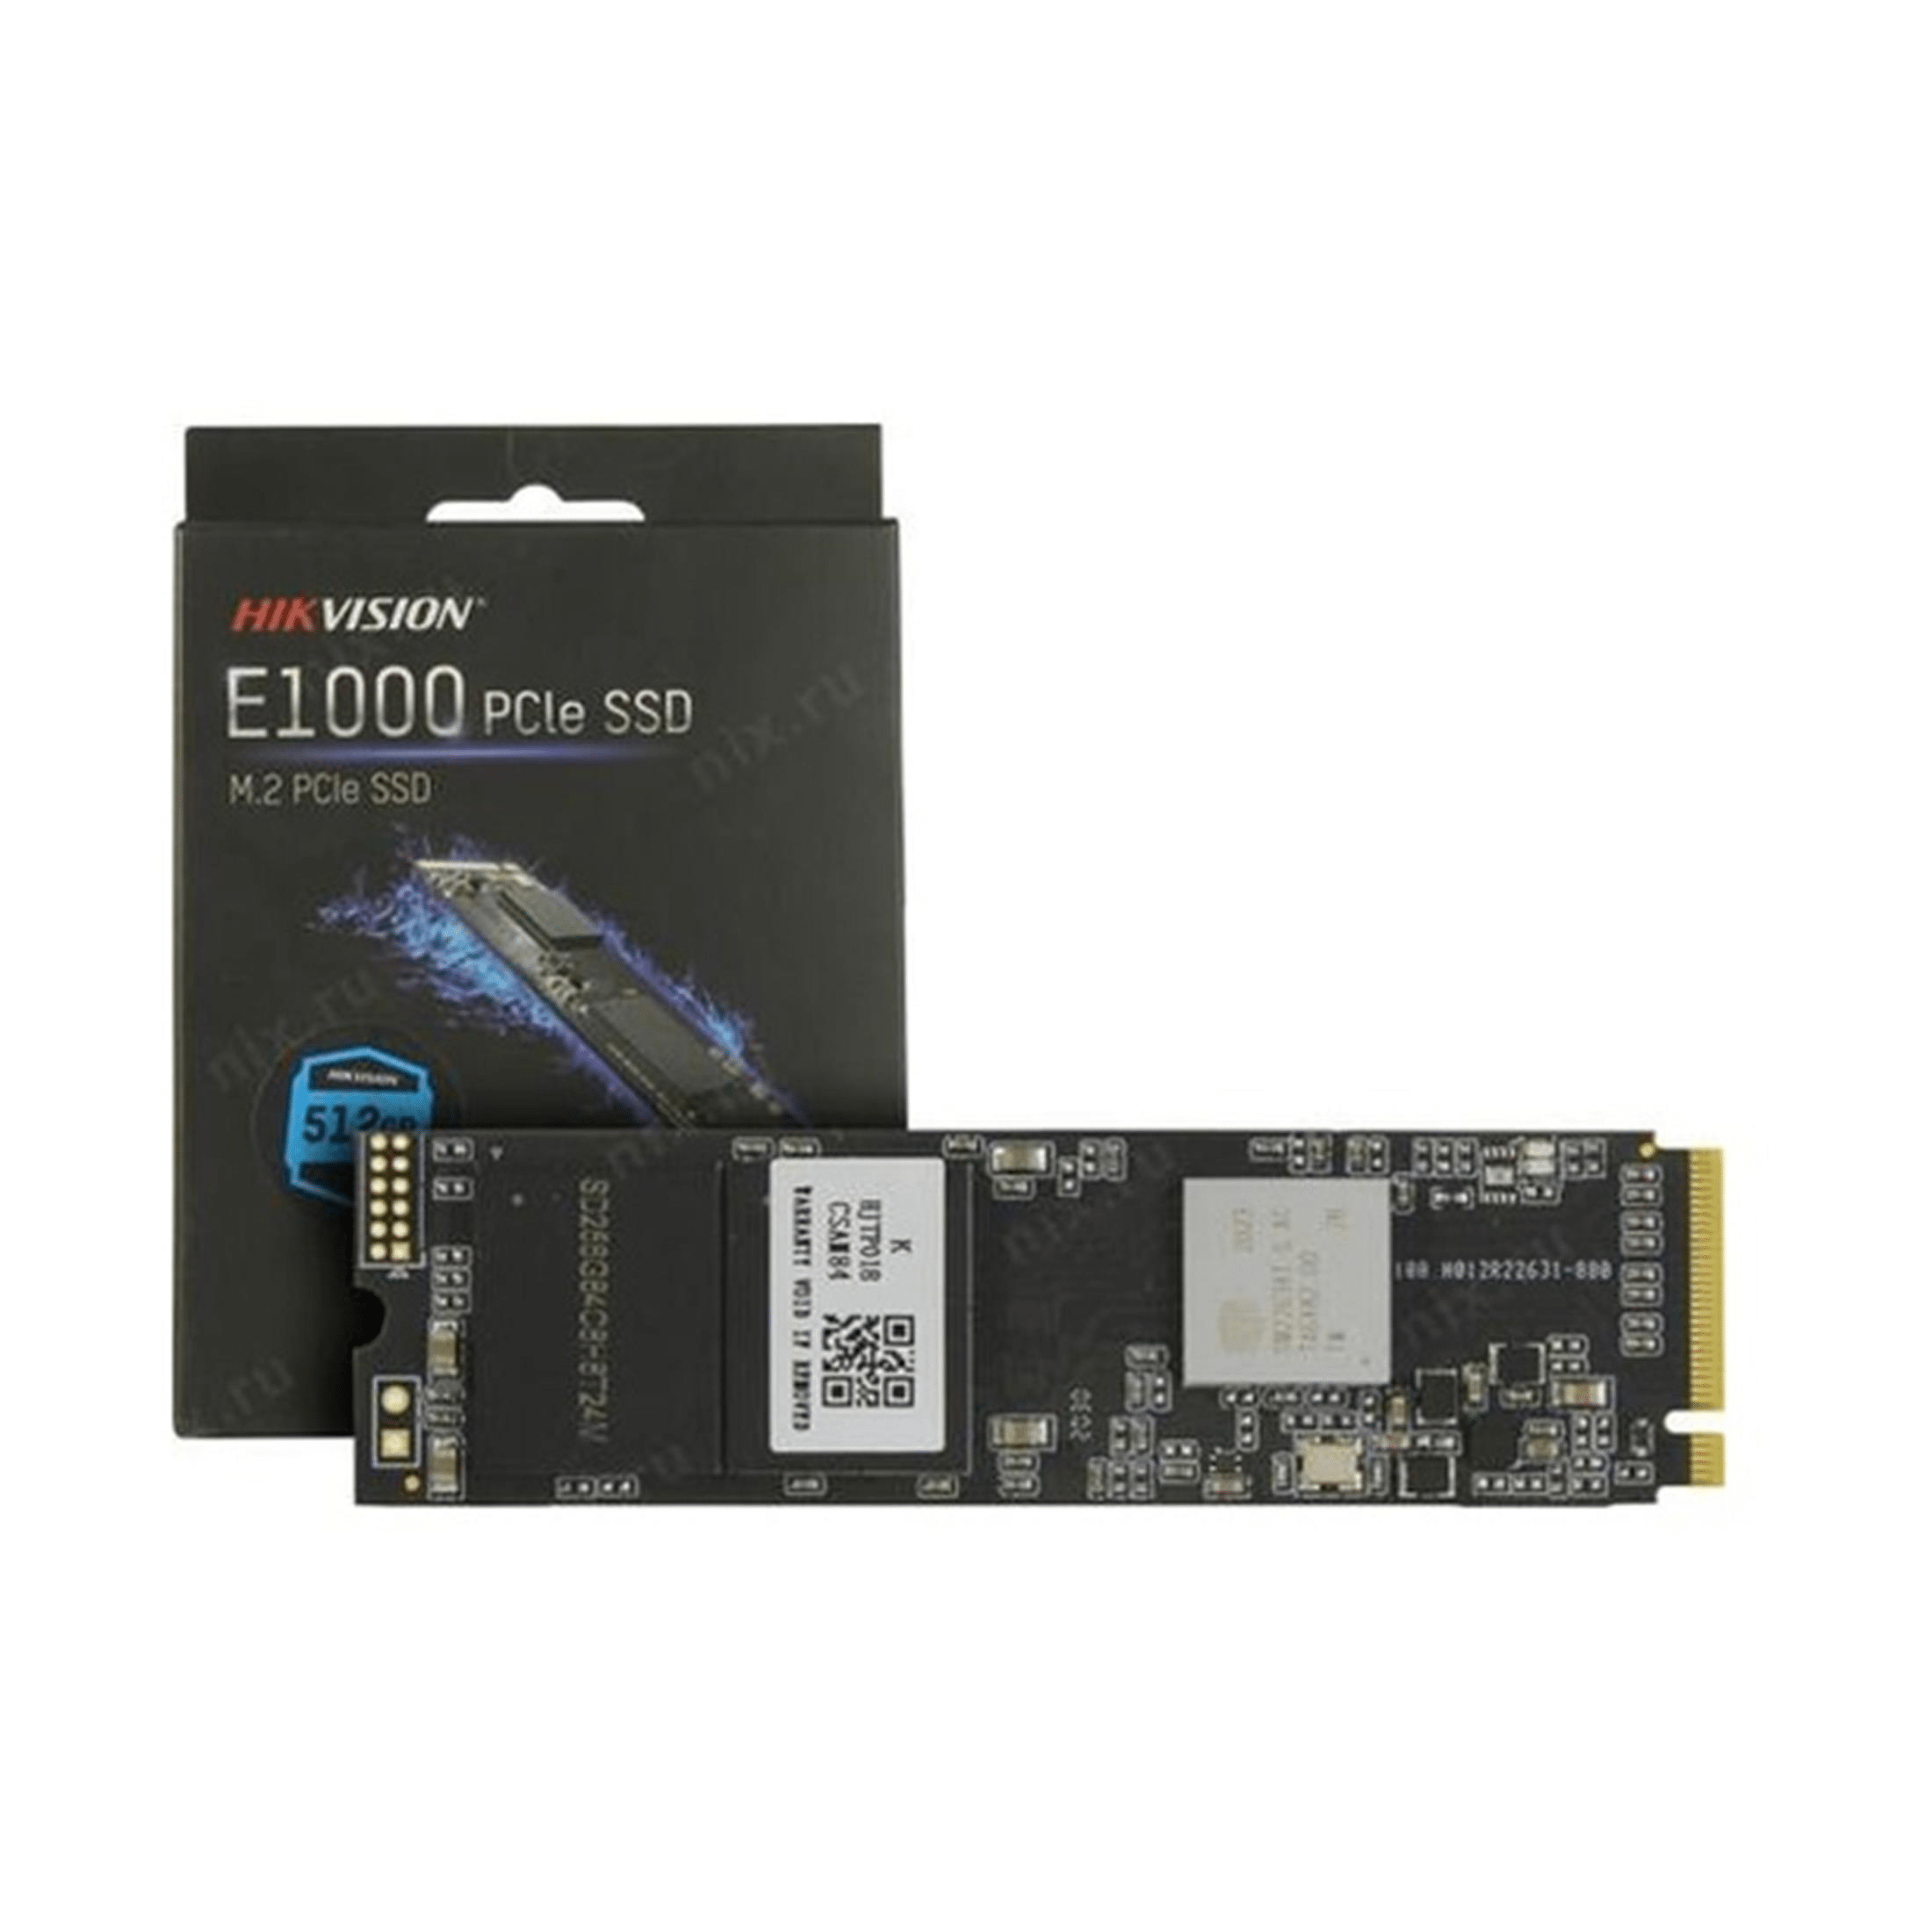 DISQUE DUR SSD M2 HIKVISION E100N 512Go - trade solutions company